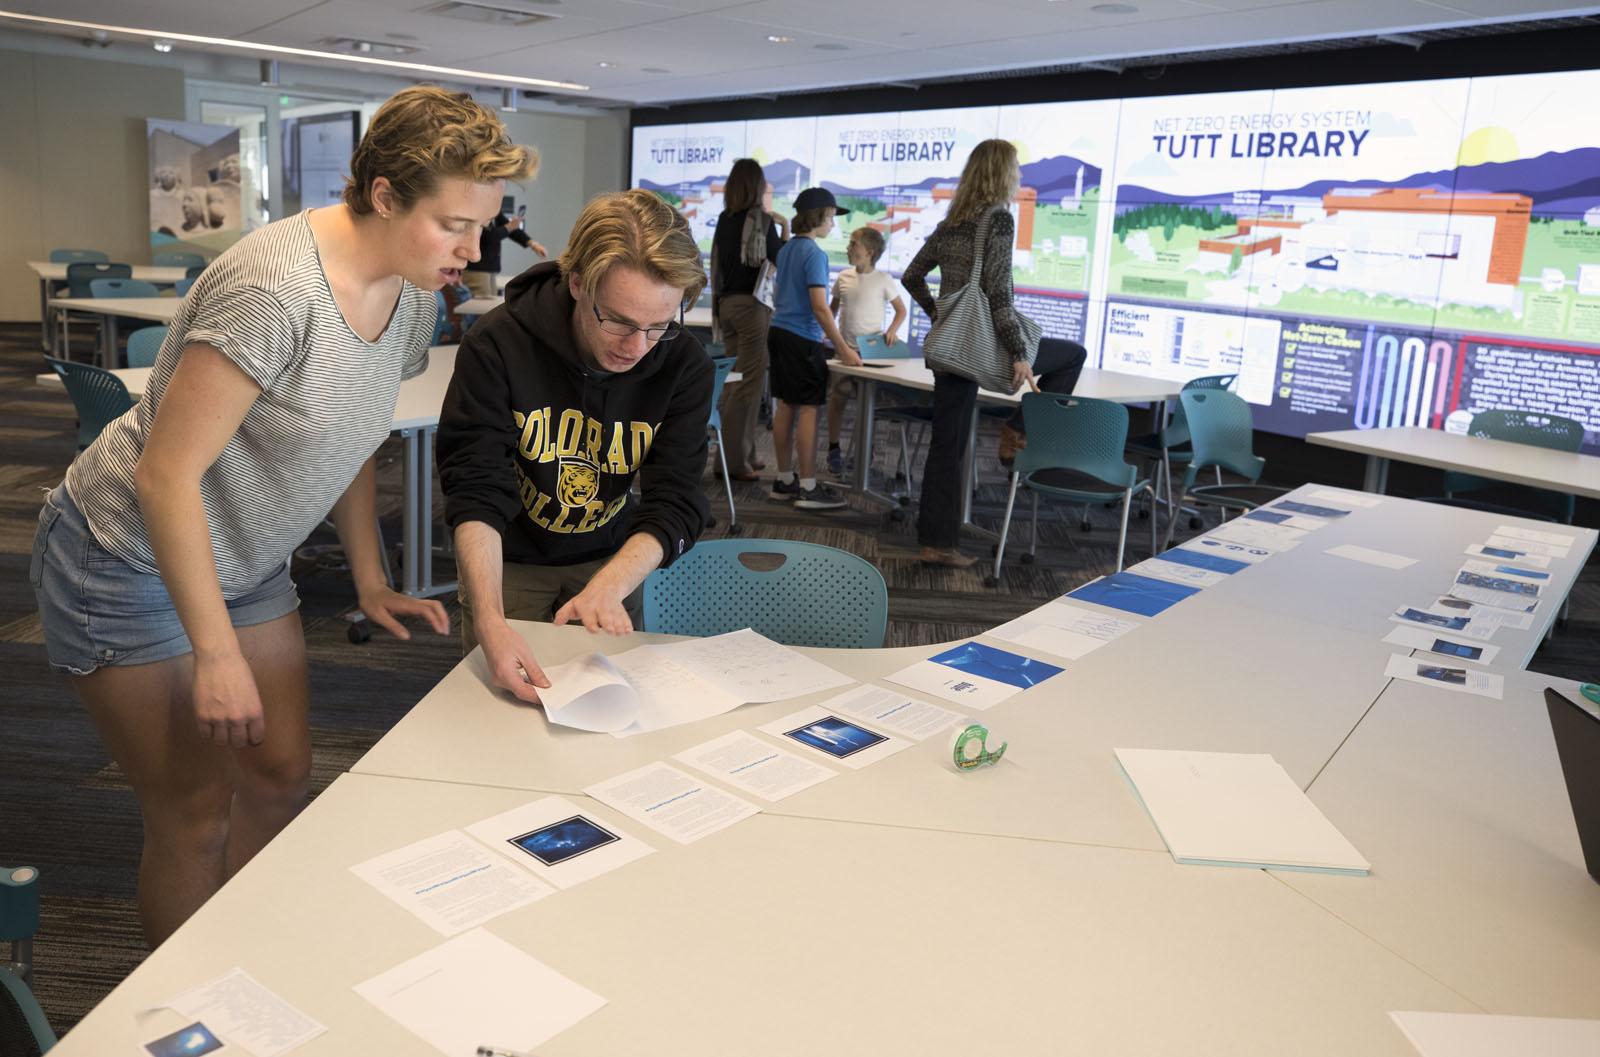 Students work on a final project for class as visitors check out the Net Zero display on the Ryan Data Visualization Wall.